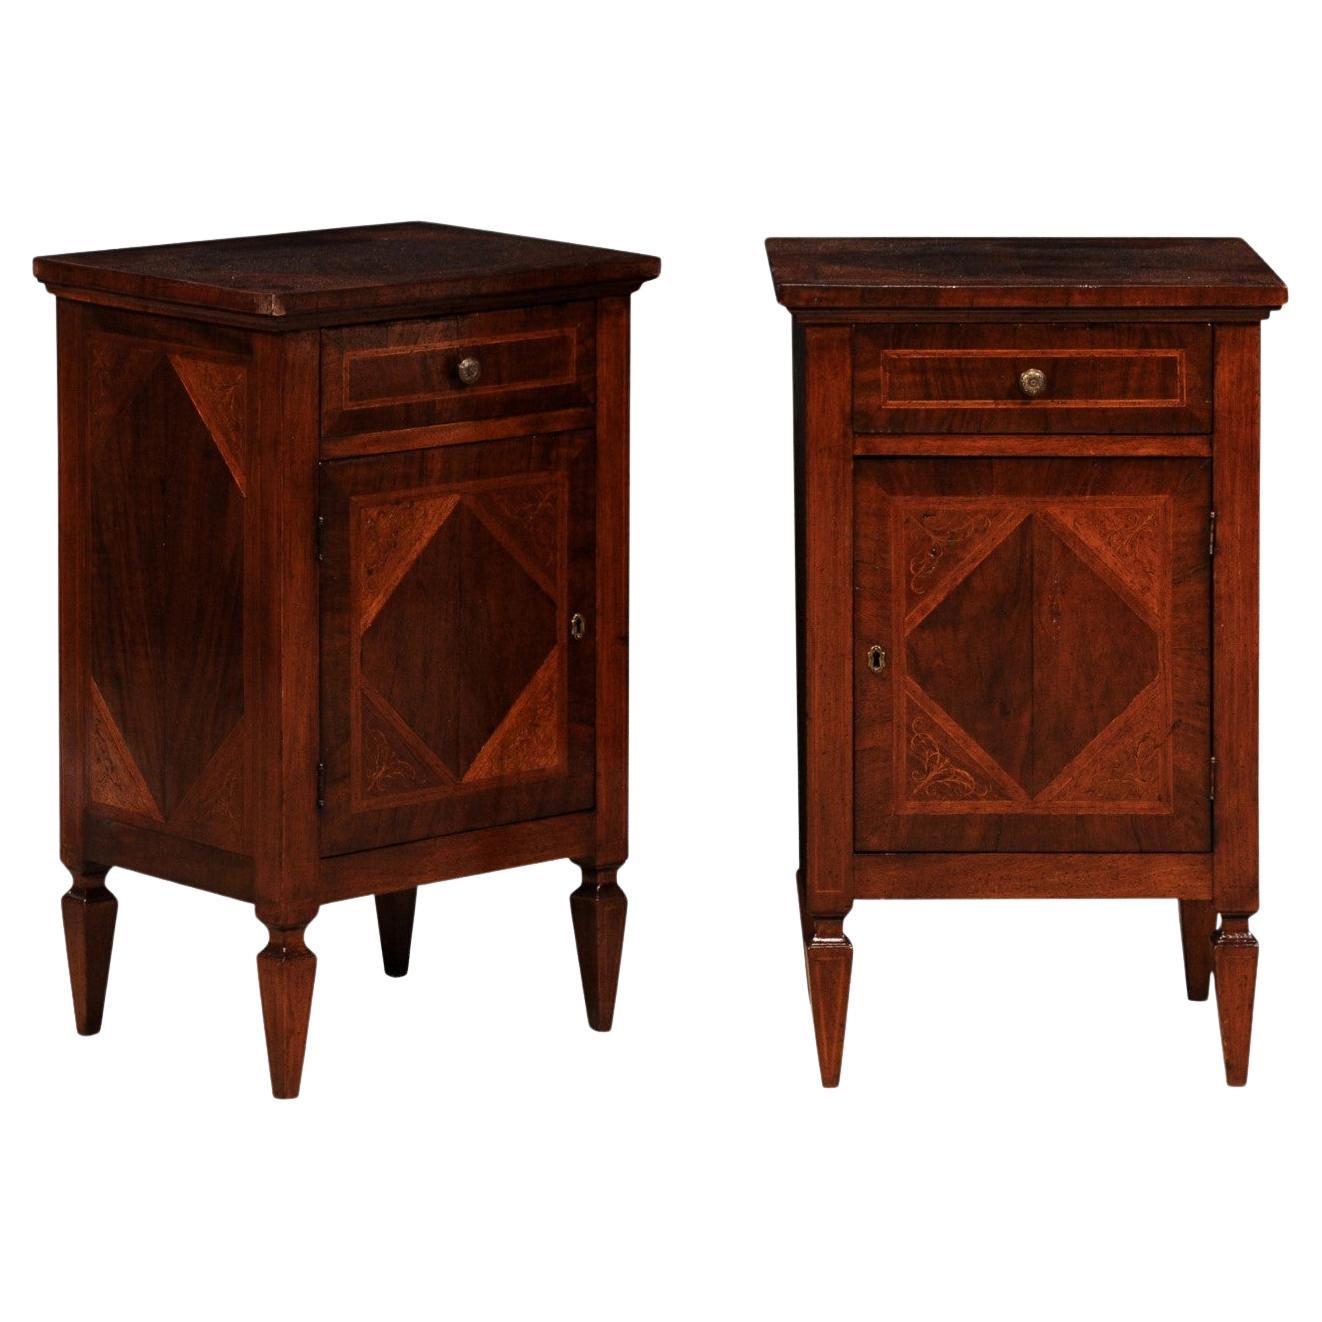 Italian 1900s Walnut and Mahogany Bedside Tables with Scrolling Marquetry